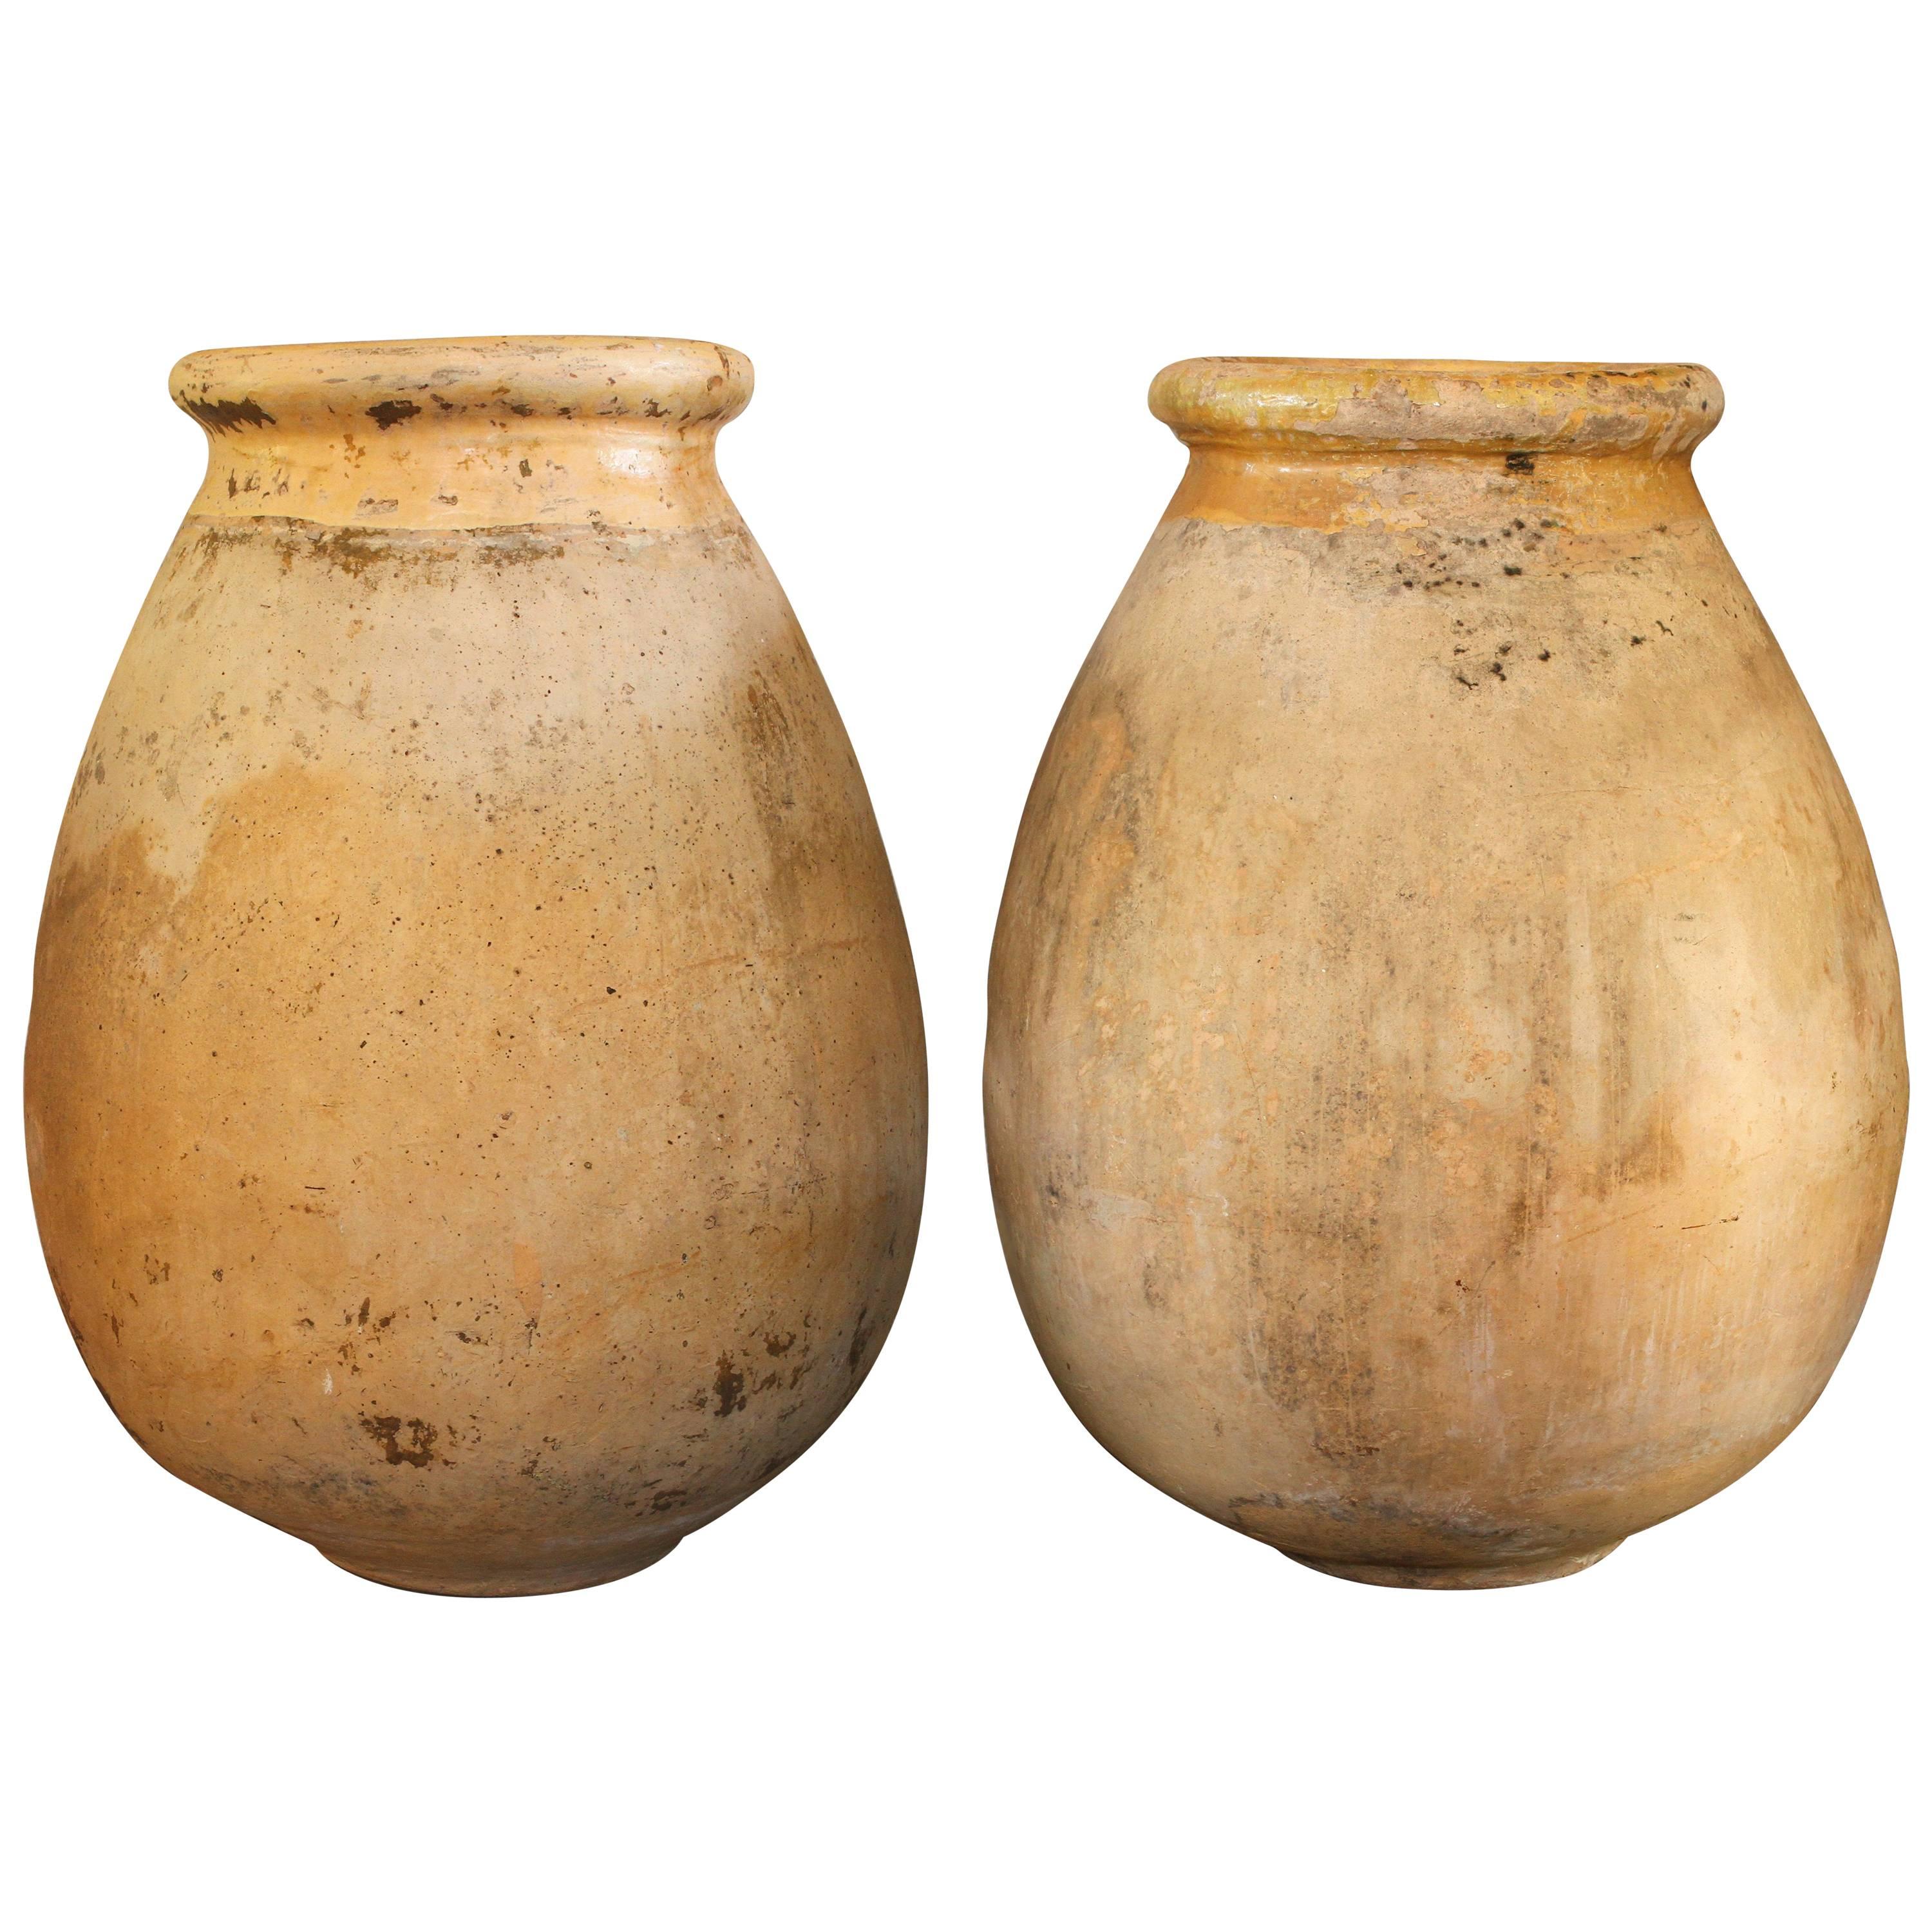 Pair of Large 18th Century Biot Olive Oil Jars from a Farm in Toulon, France